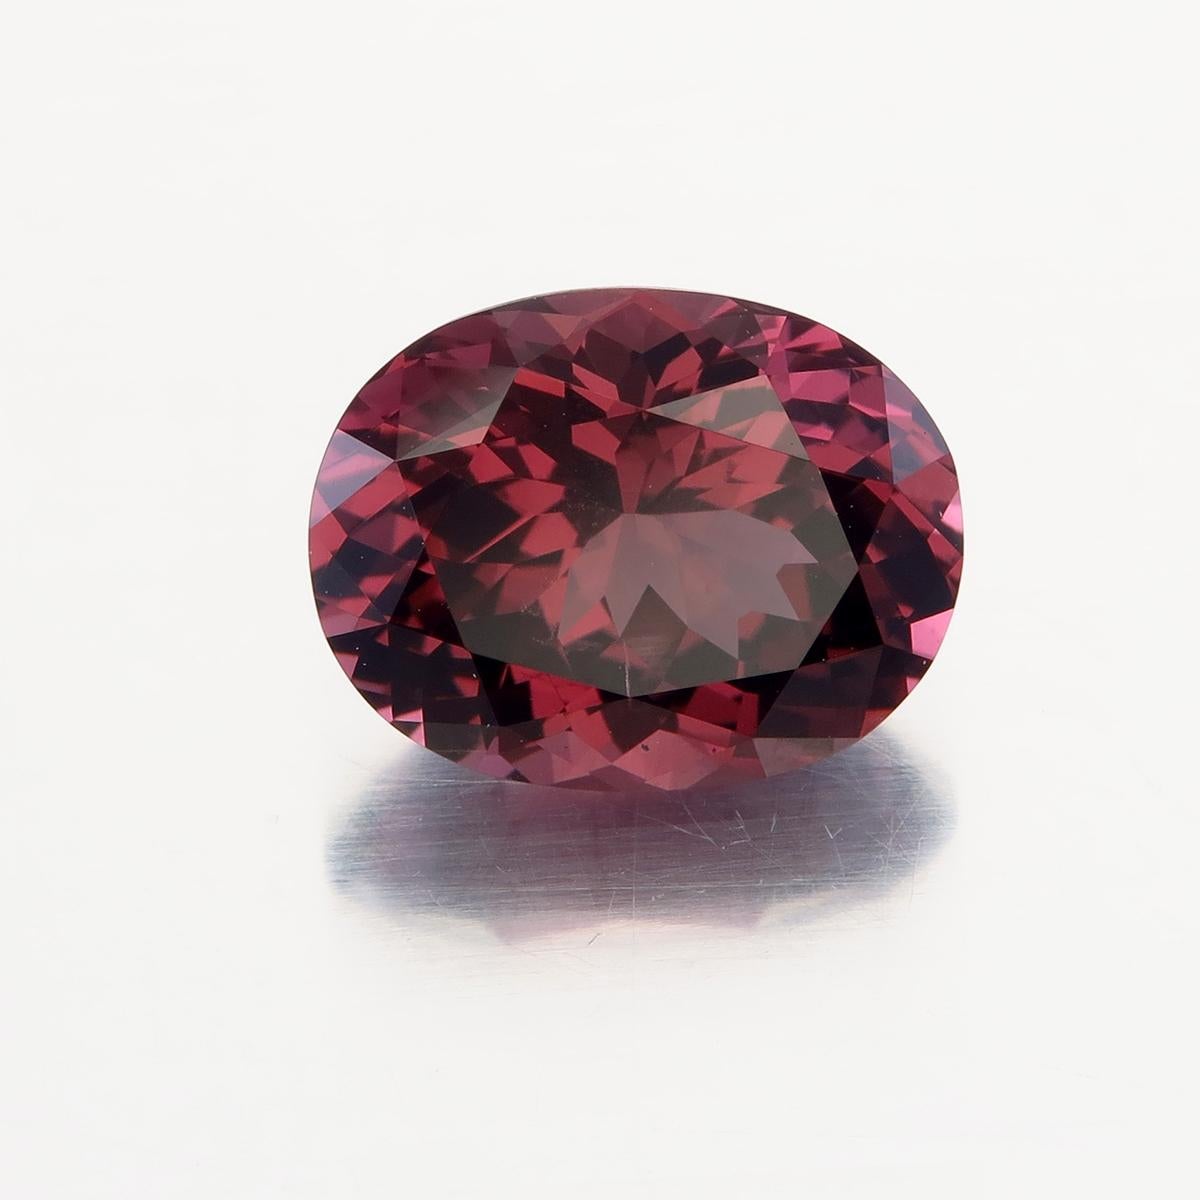 Lotus Certified 3.41 carat Red Spinel from Sri Lanka 
Shape: Oval
Cutting Style Faceted, Crown Brilliant, Pavilion Fancy
Dimensions: 10.40 x 8.10 x 5.69 mm
Weight: 3.41 Carat
No Heat or treatment
Lotus report: 3795-0586